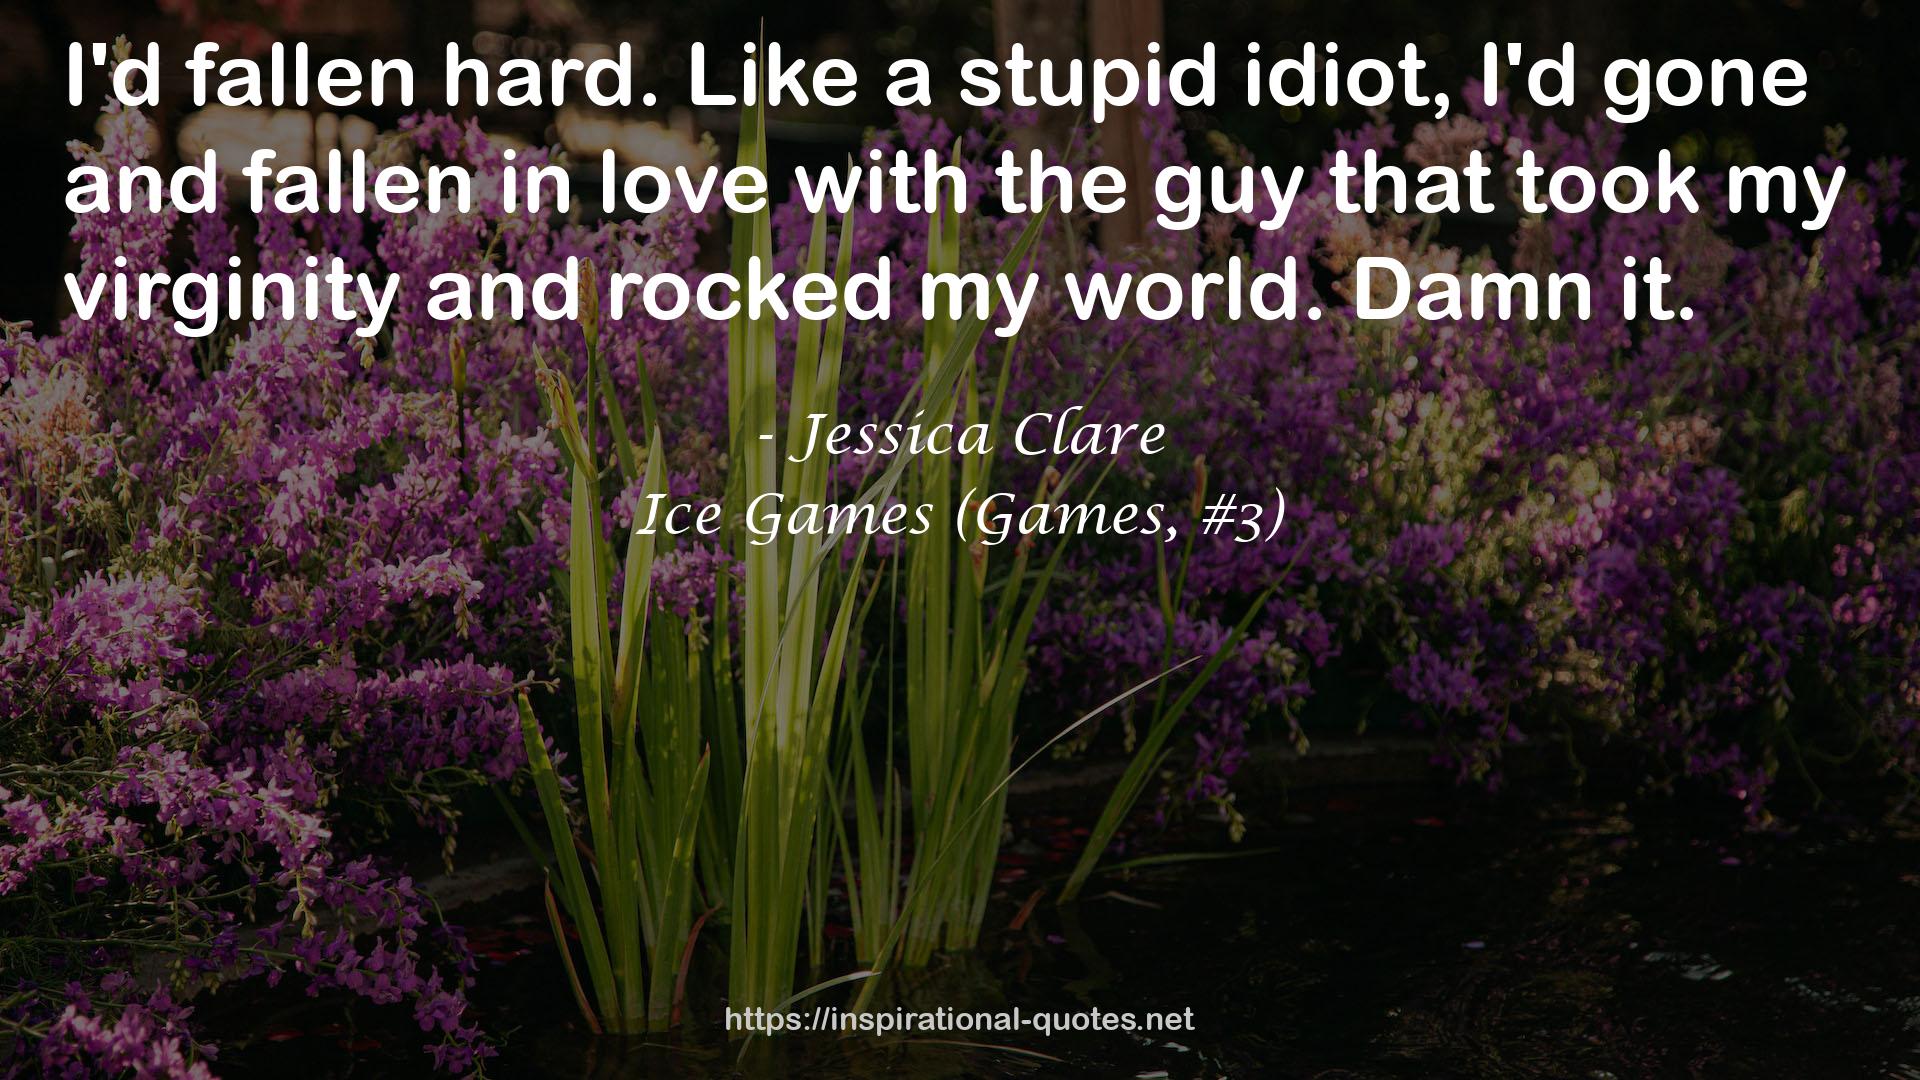 Ice Games (Games, #3) QUOTES